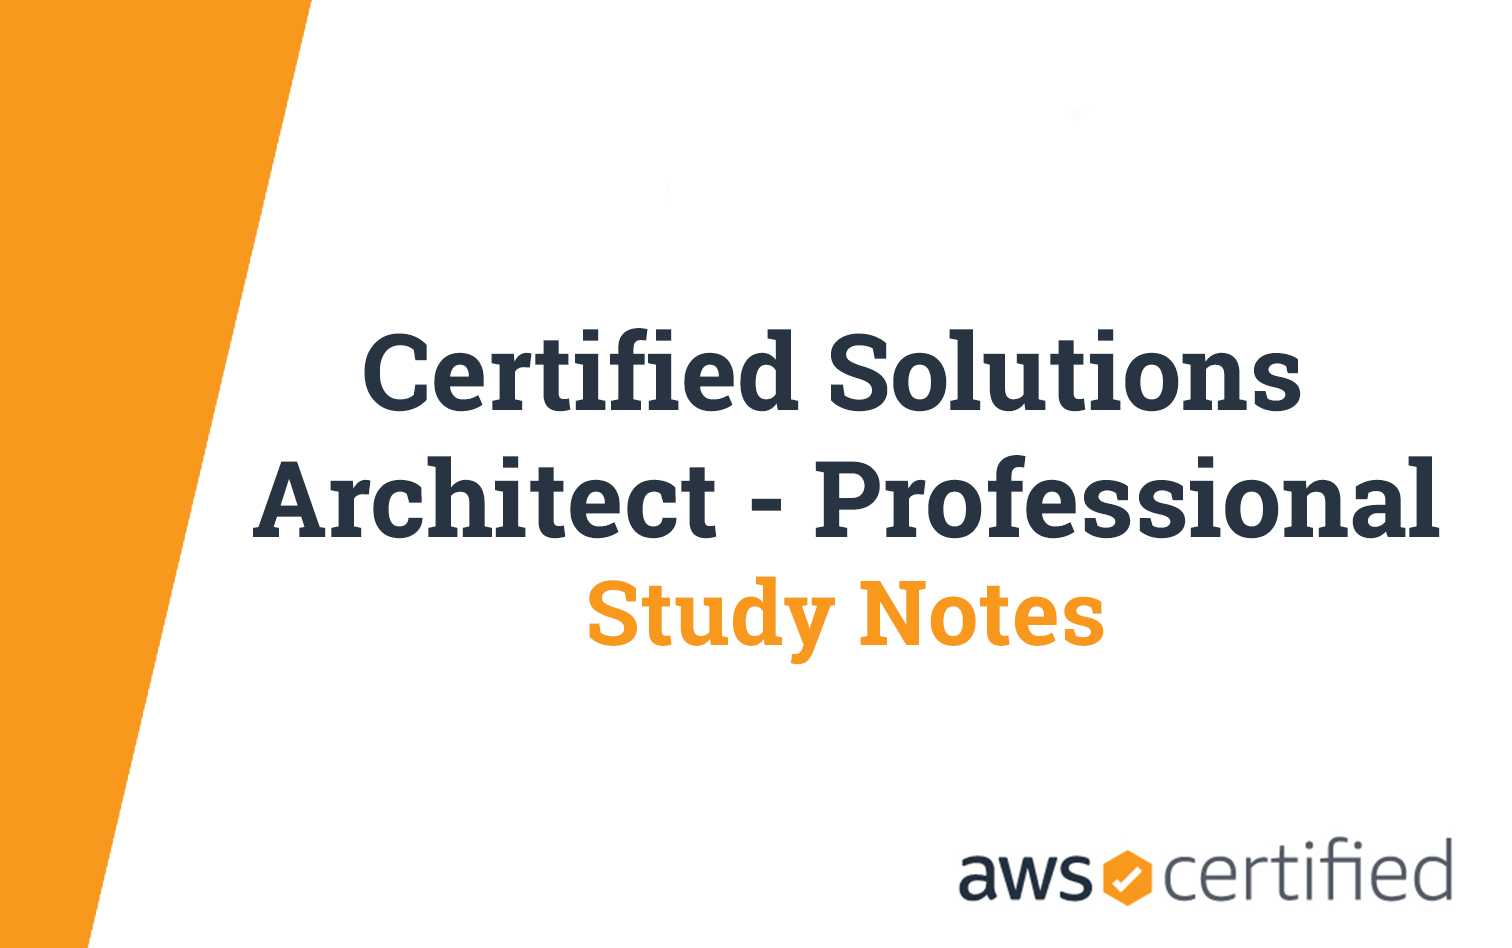 Certified Solutions Architect Professional - Study Notes